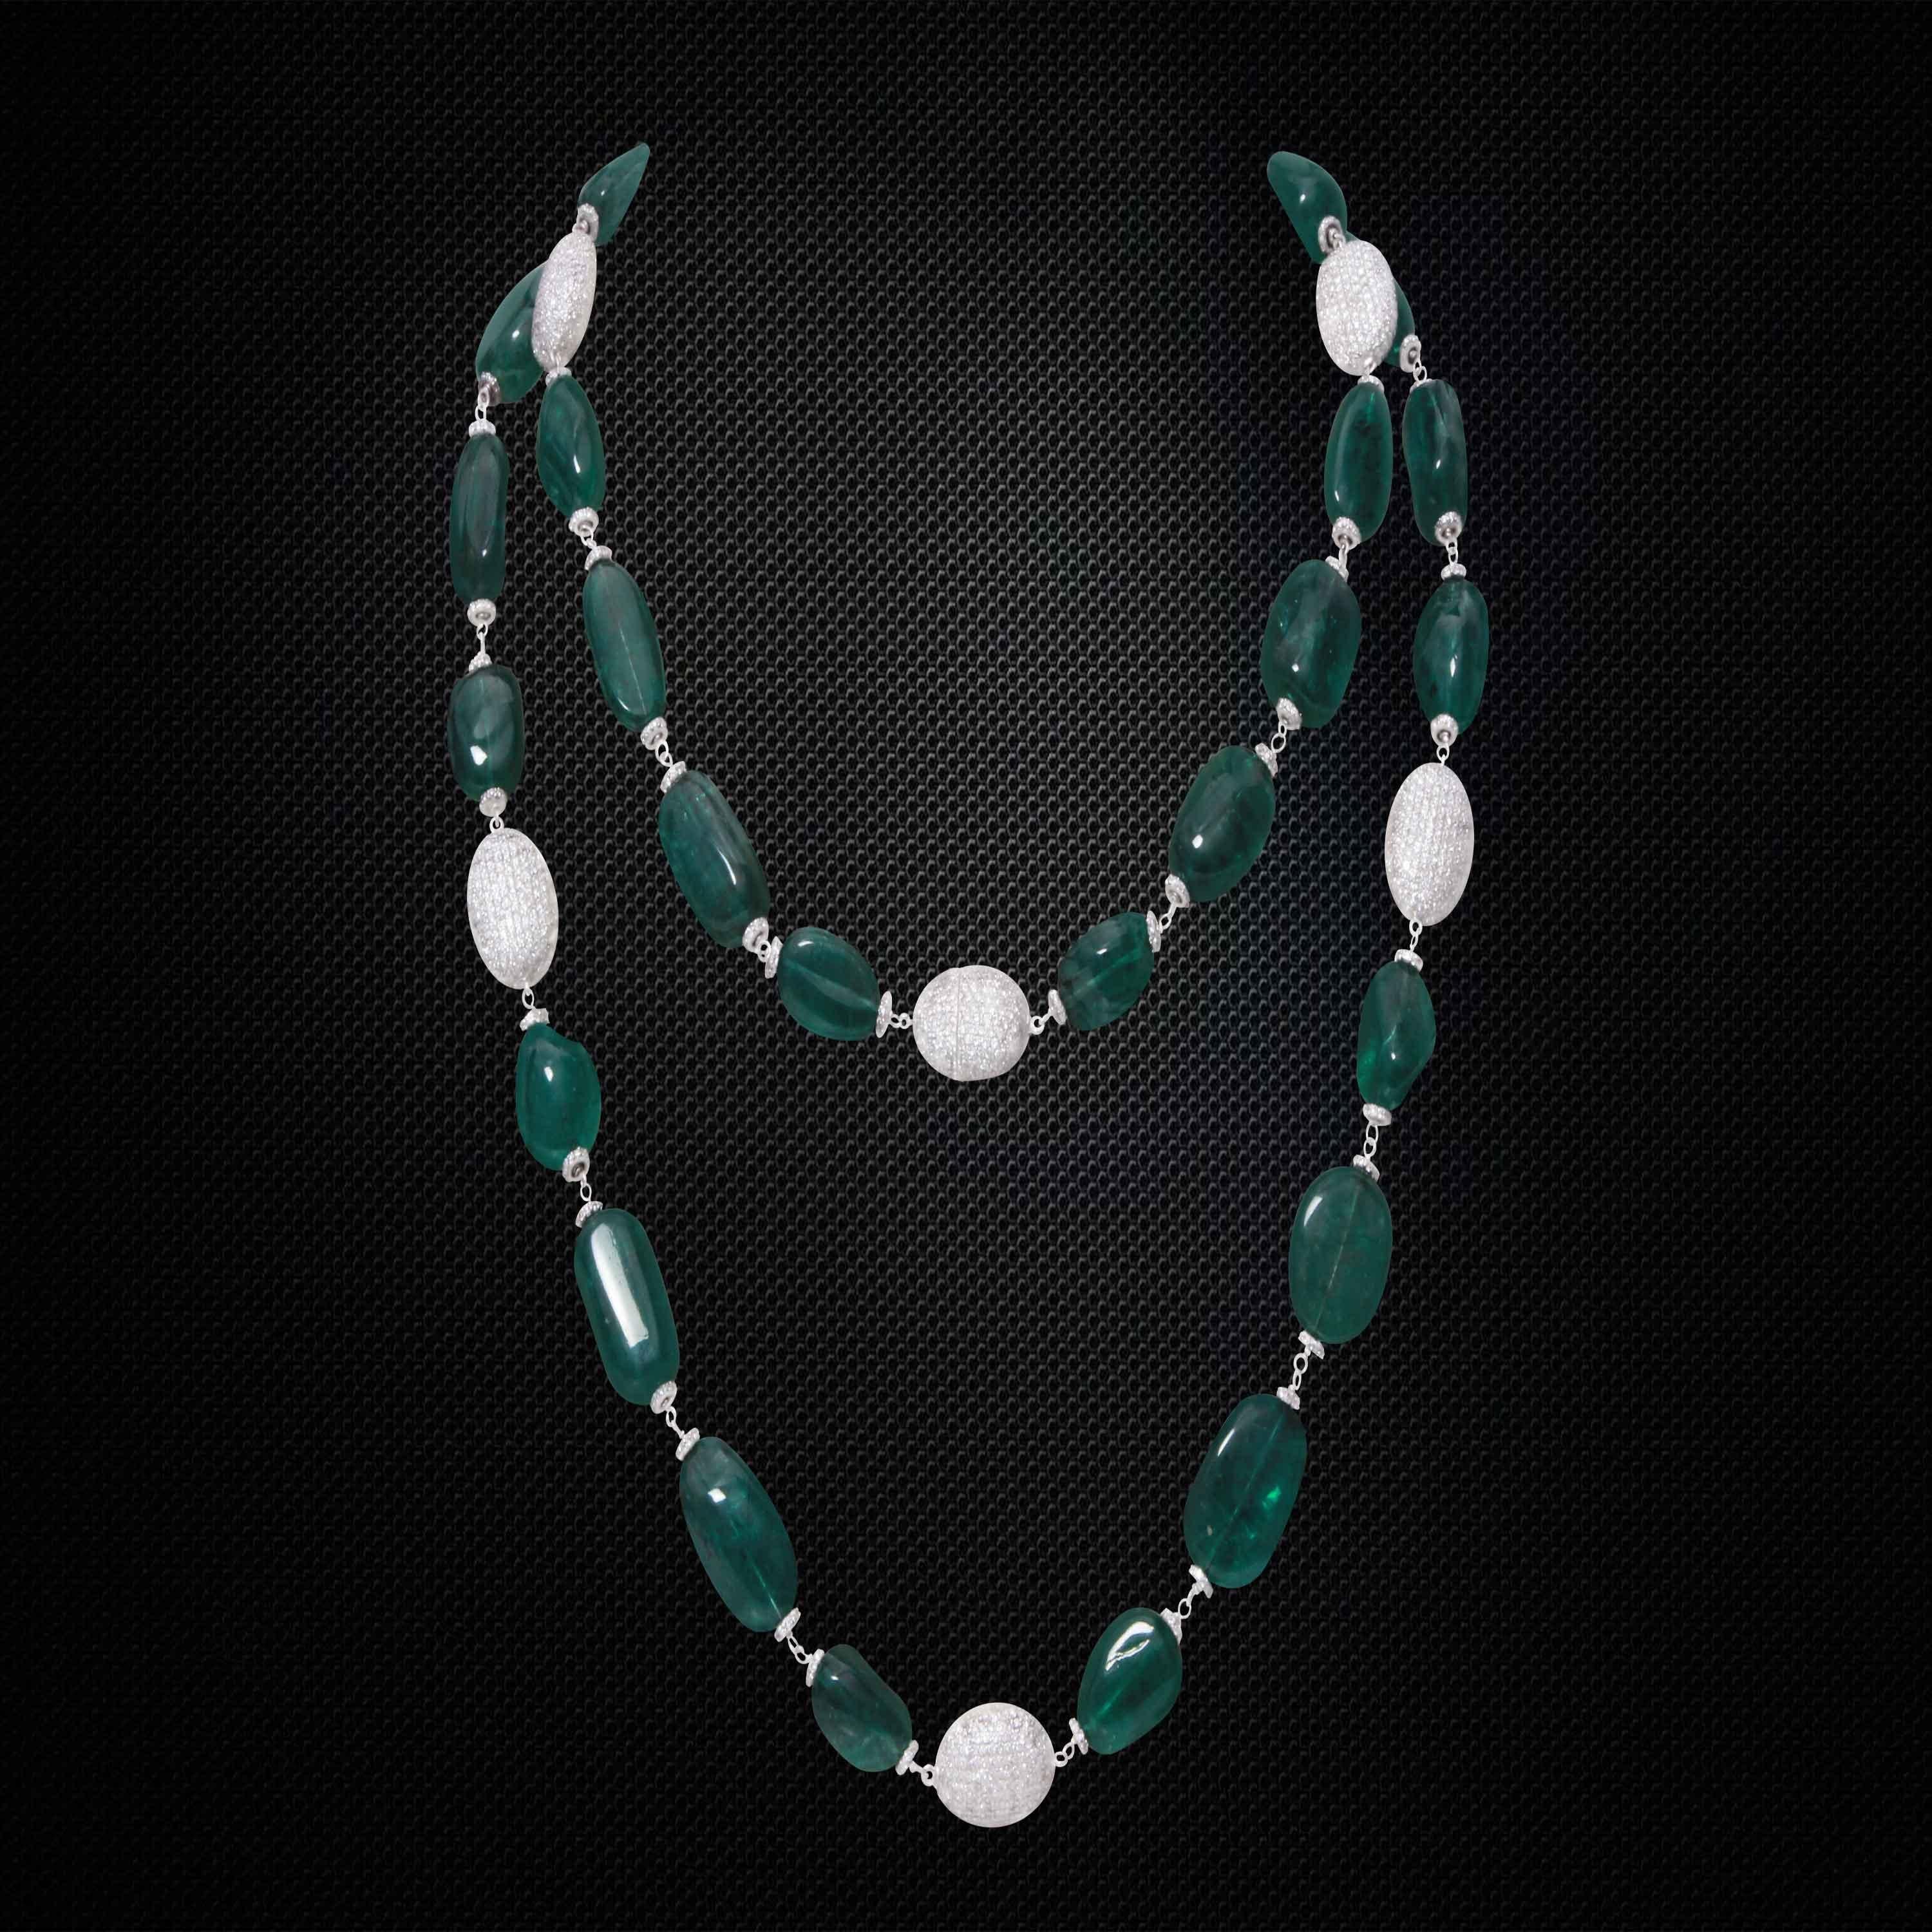 A single strand Zambian Emerald Necklace, which consist of 32 pieces which weigh 452.38 carats and includes 21.91 carats Round White Diamonds.
This necklace is made in 18K White Gold and weighs approximately 45.822 grams.
The clasp is also made of